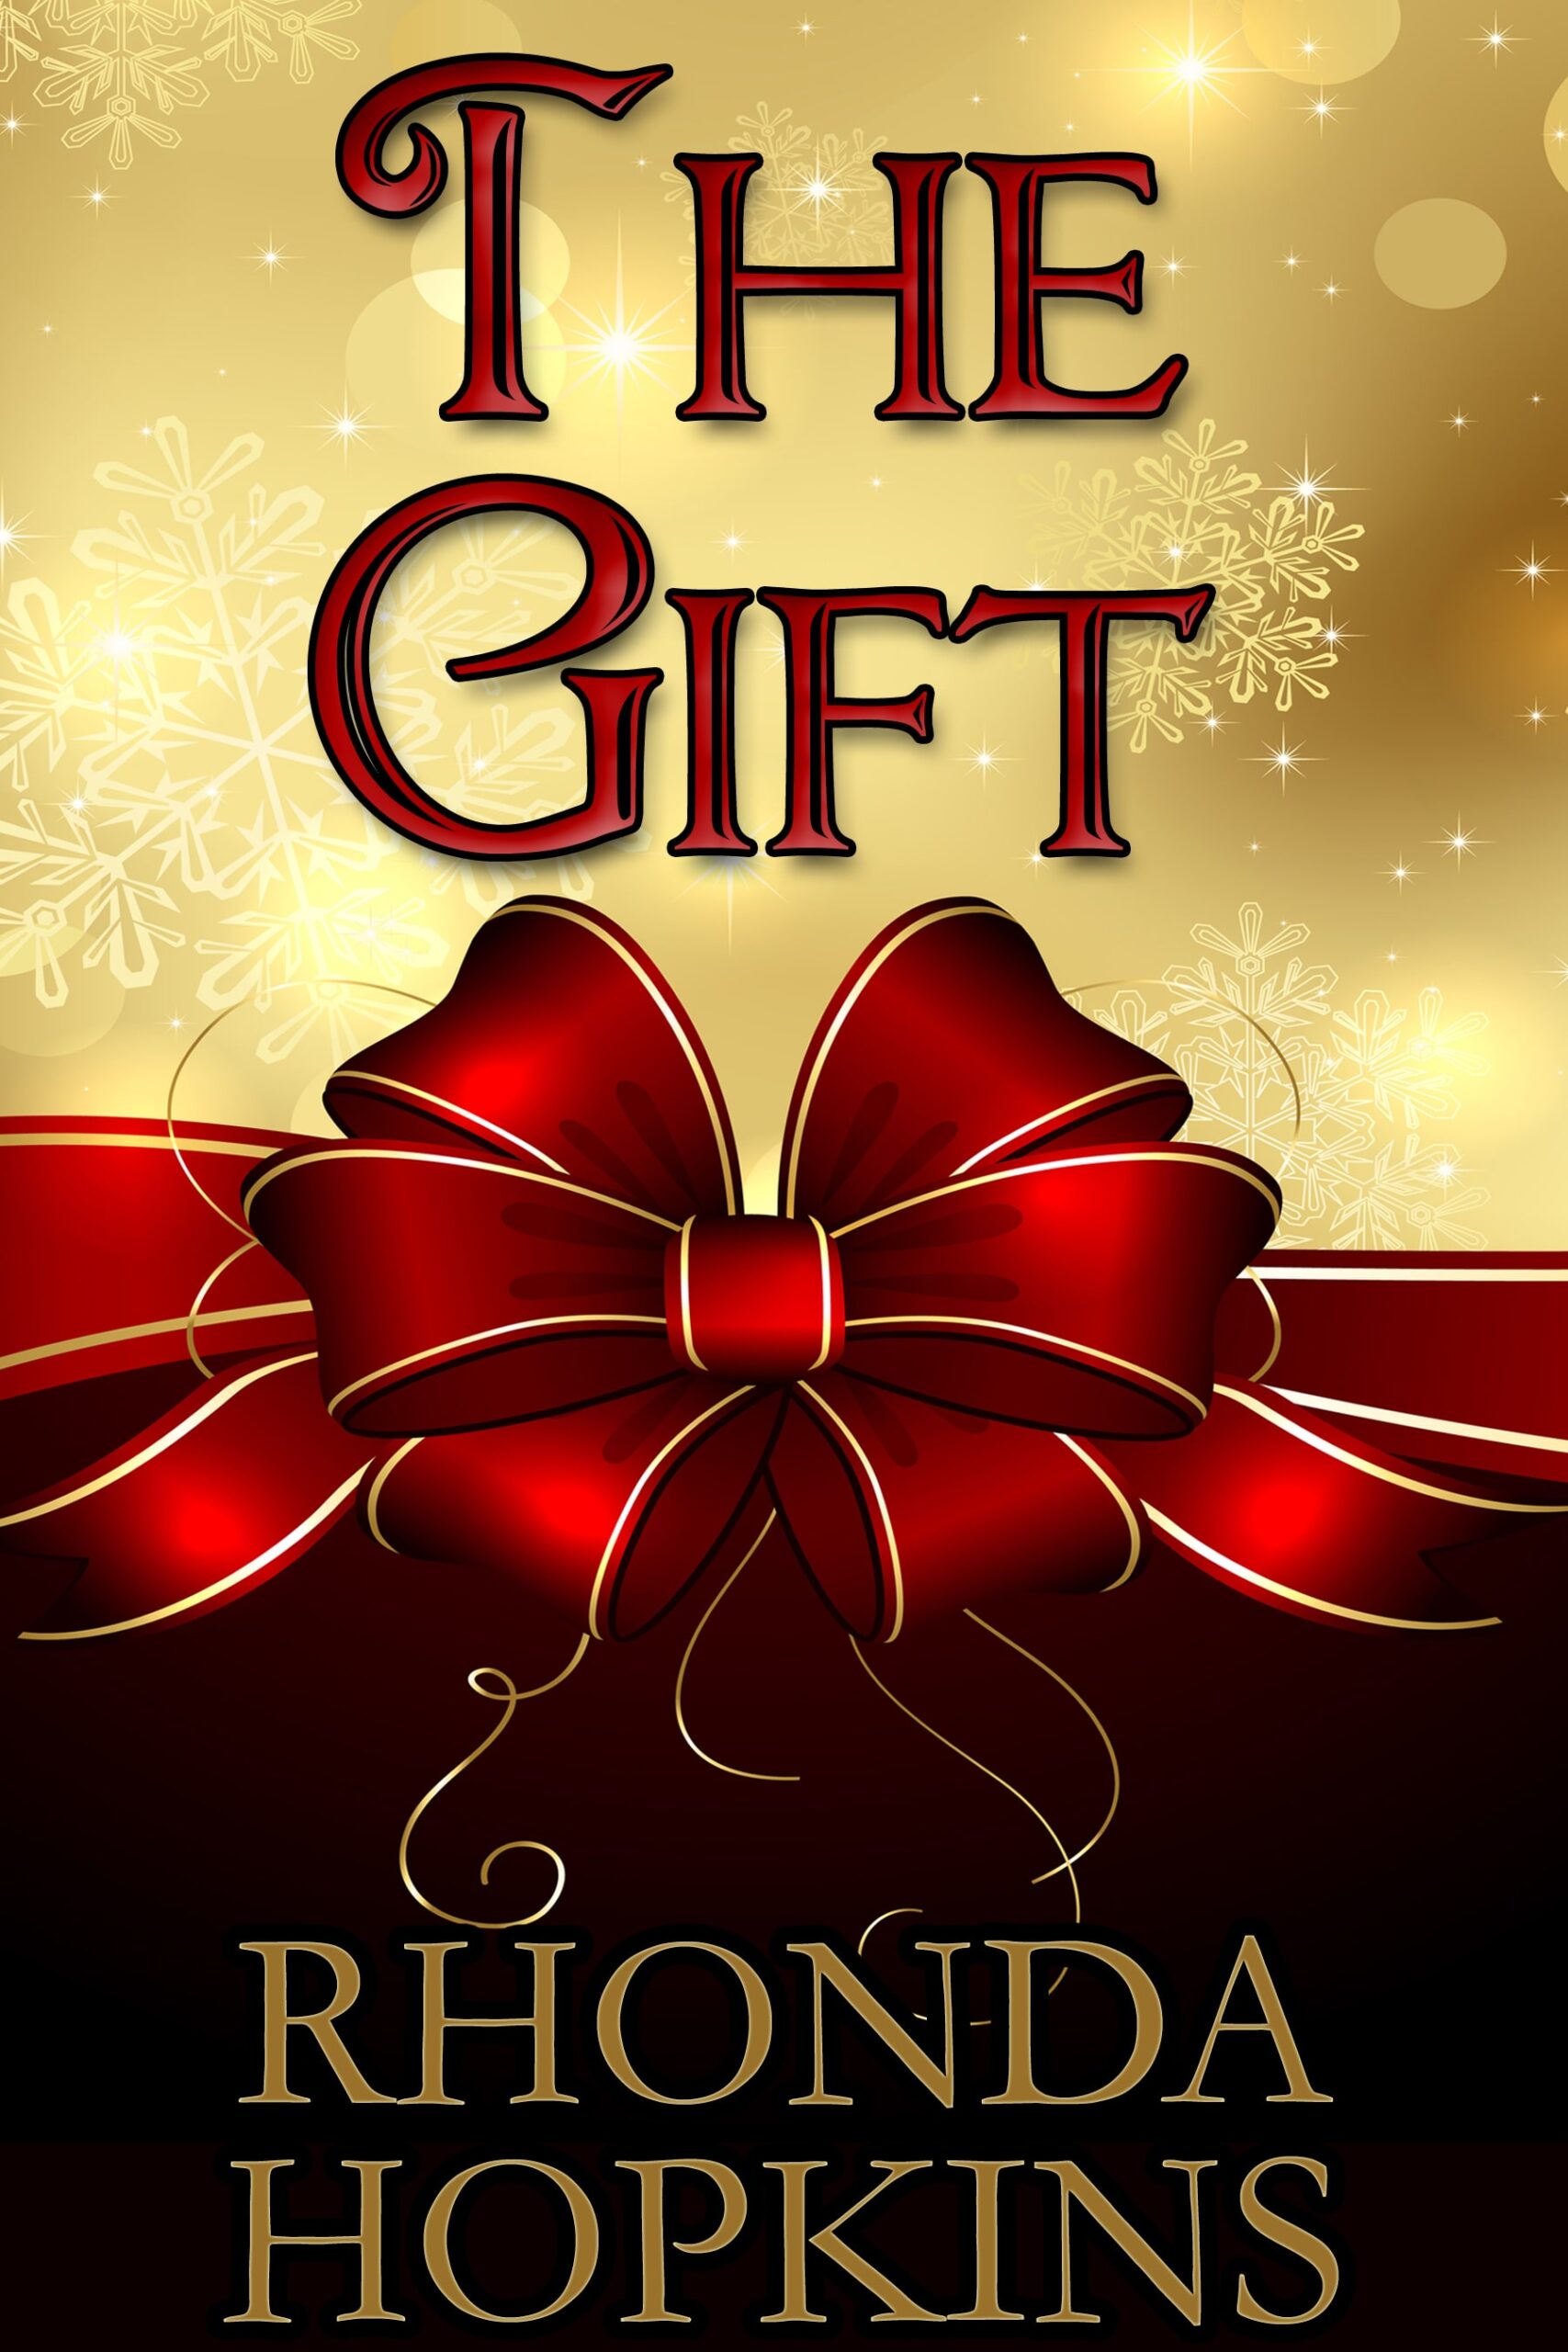 The Gift by Rhonda Hopkins. A large burgandy bow on a background of gold